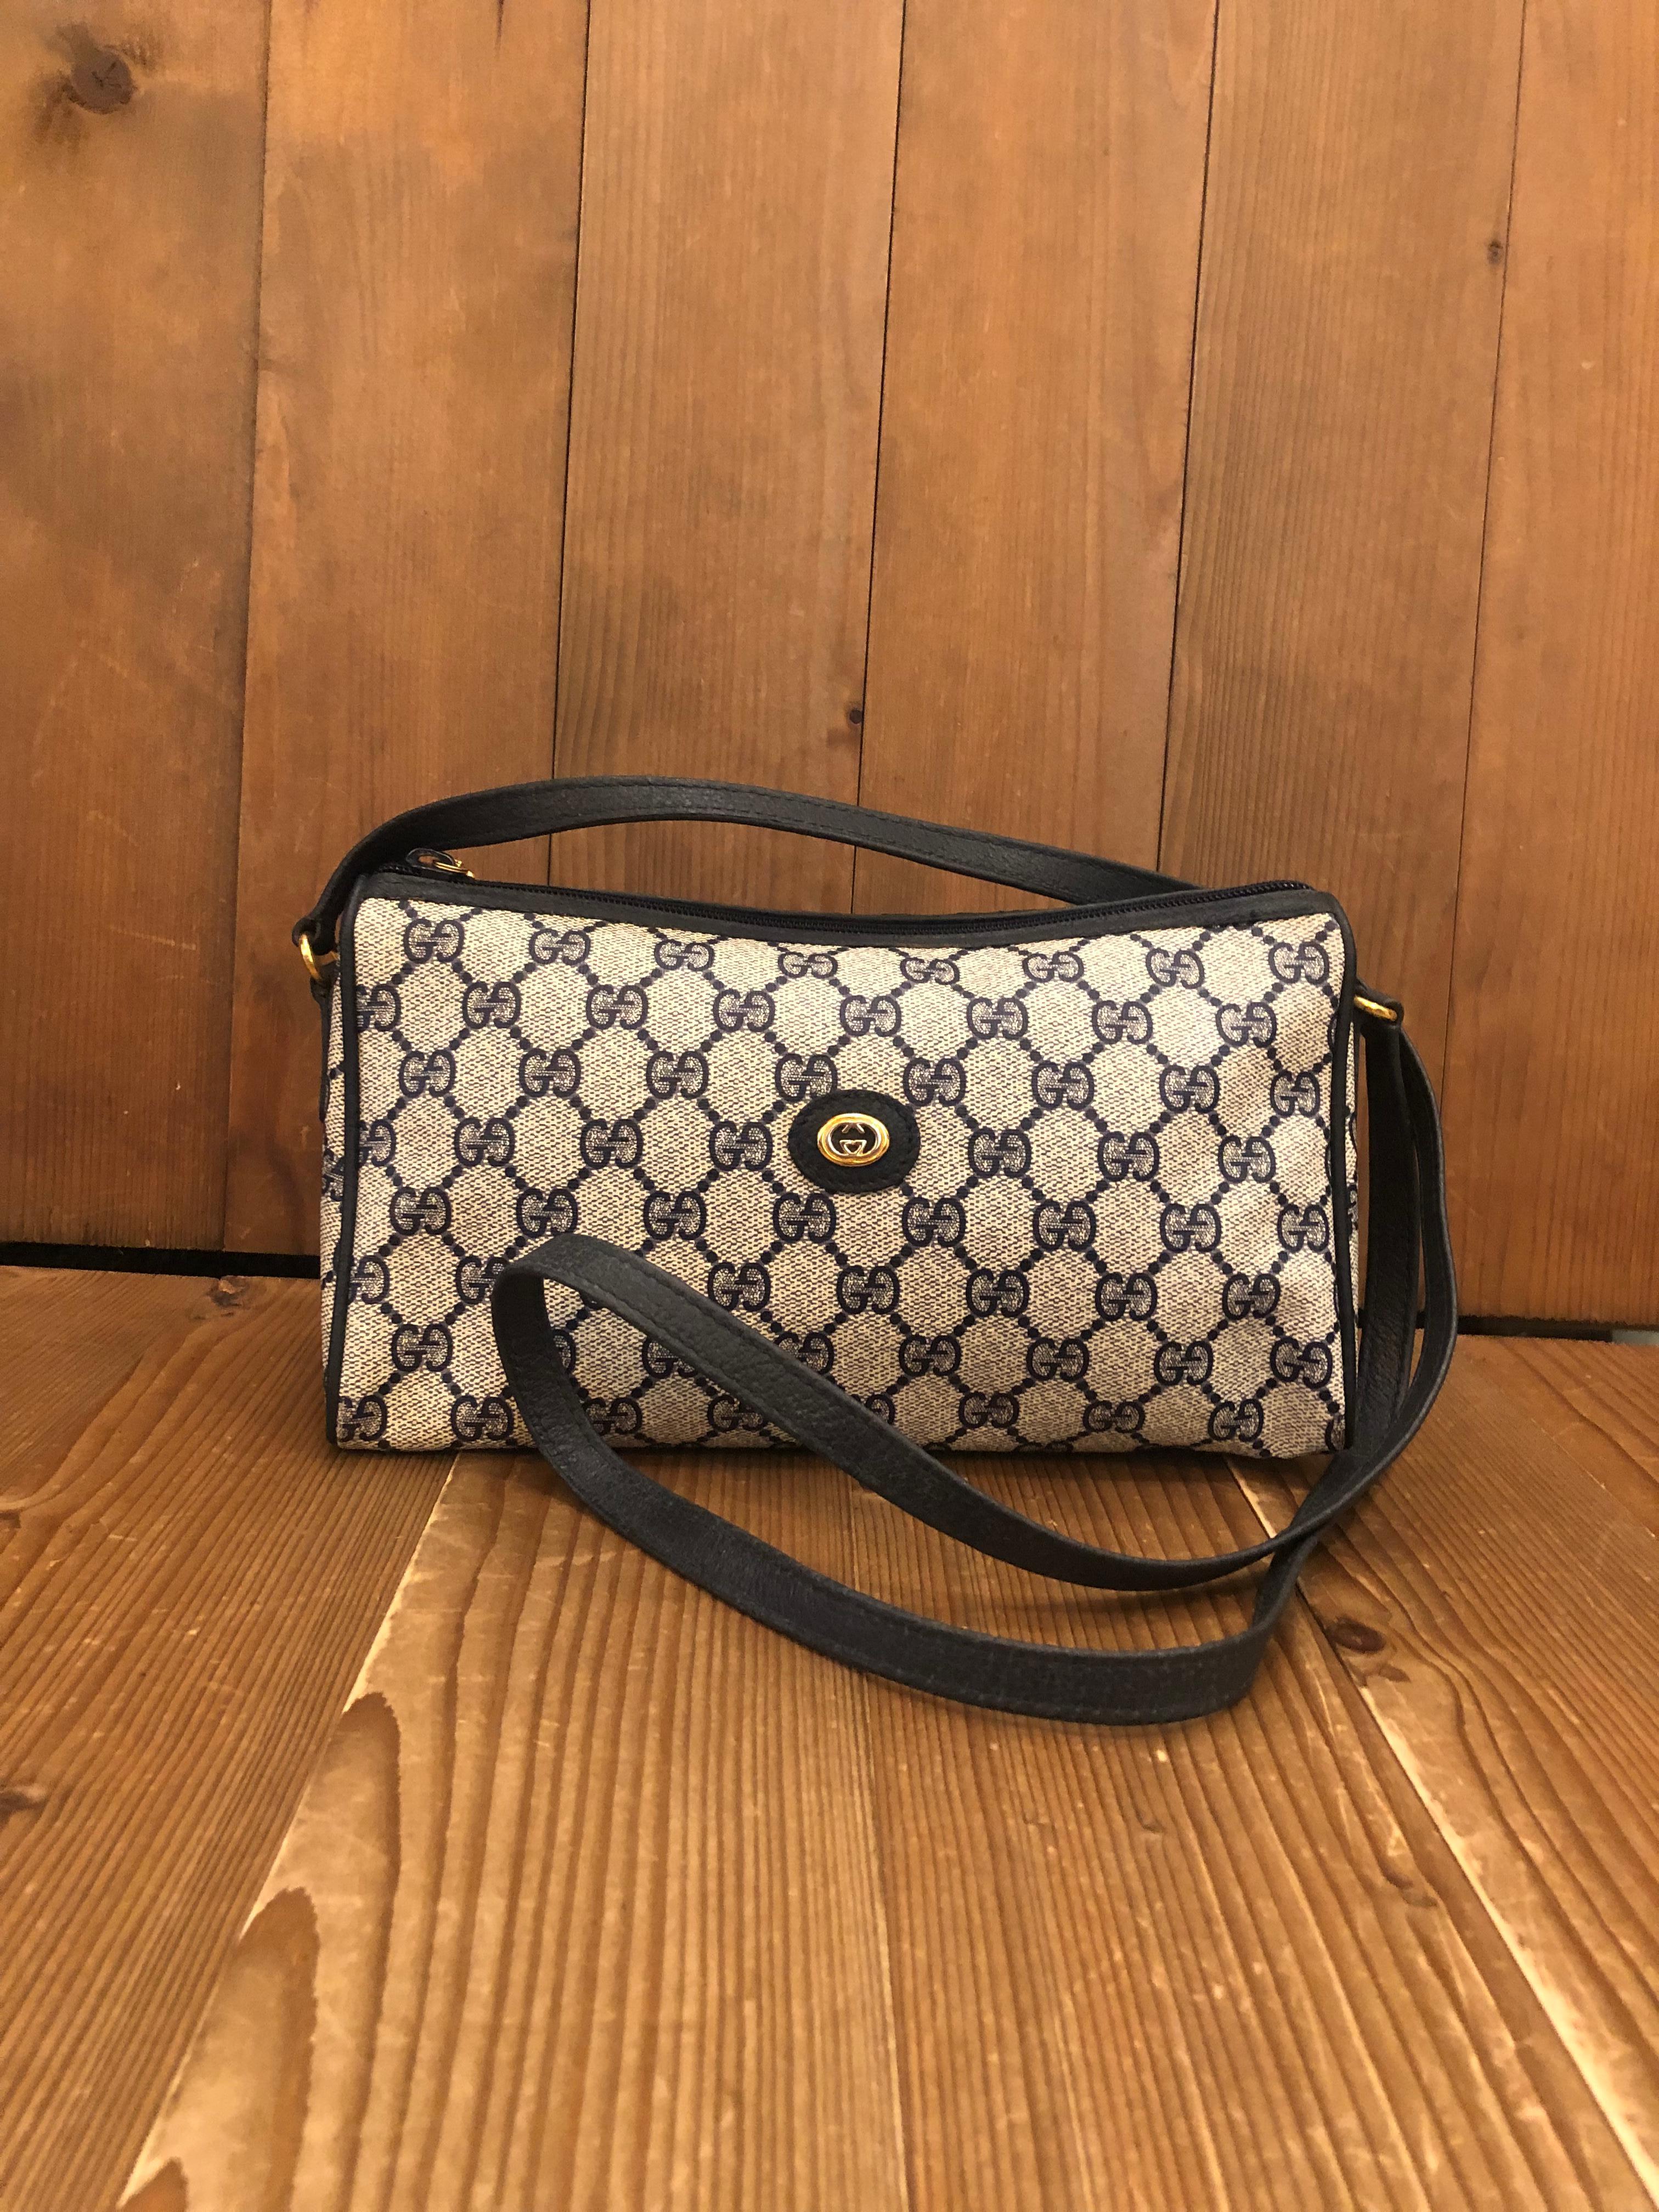 This vintage GUCCI triangle crossbody bag is crafted of monogram canvas and leather in navy. Zipper top closure opens to a coated interior in navy featuring a zippered pocket. Made in Italy. Measures approximately 9.5 x 5 x 4.5 Drop 21